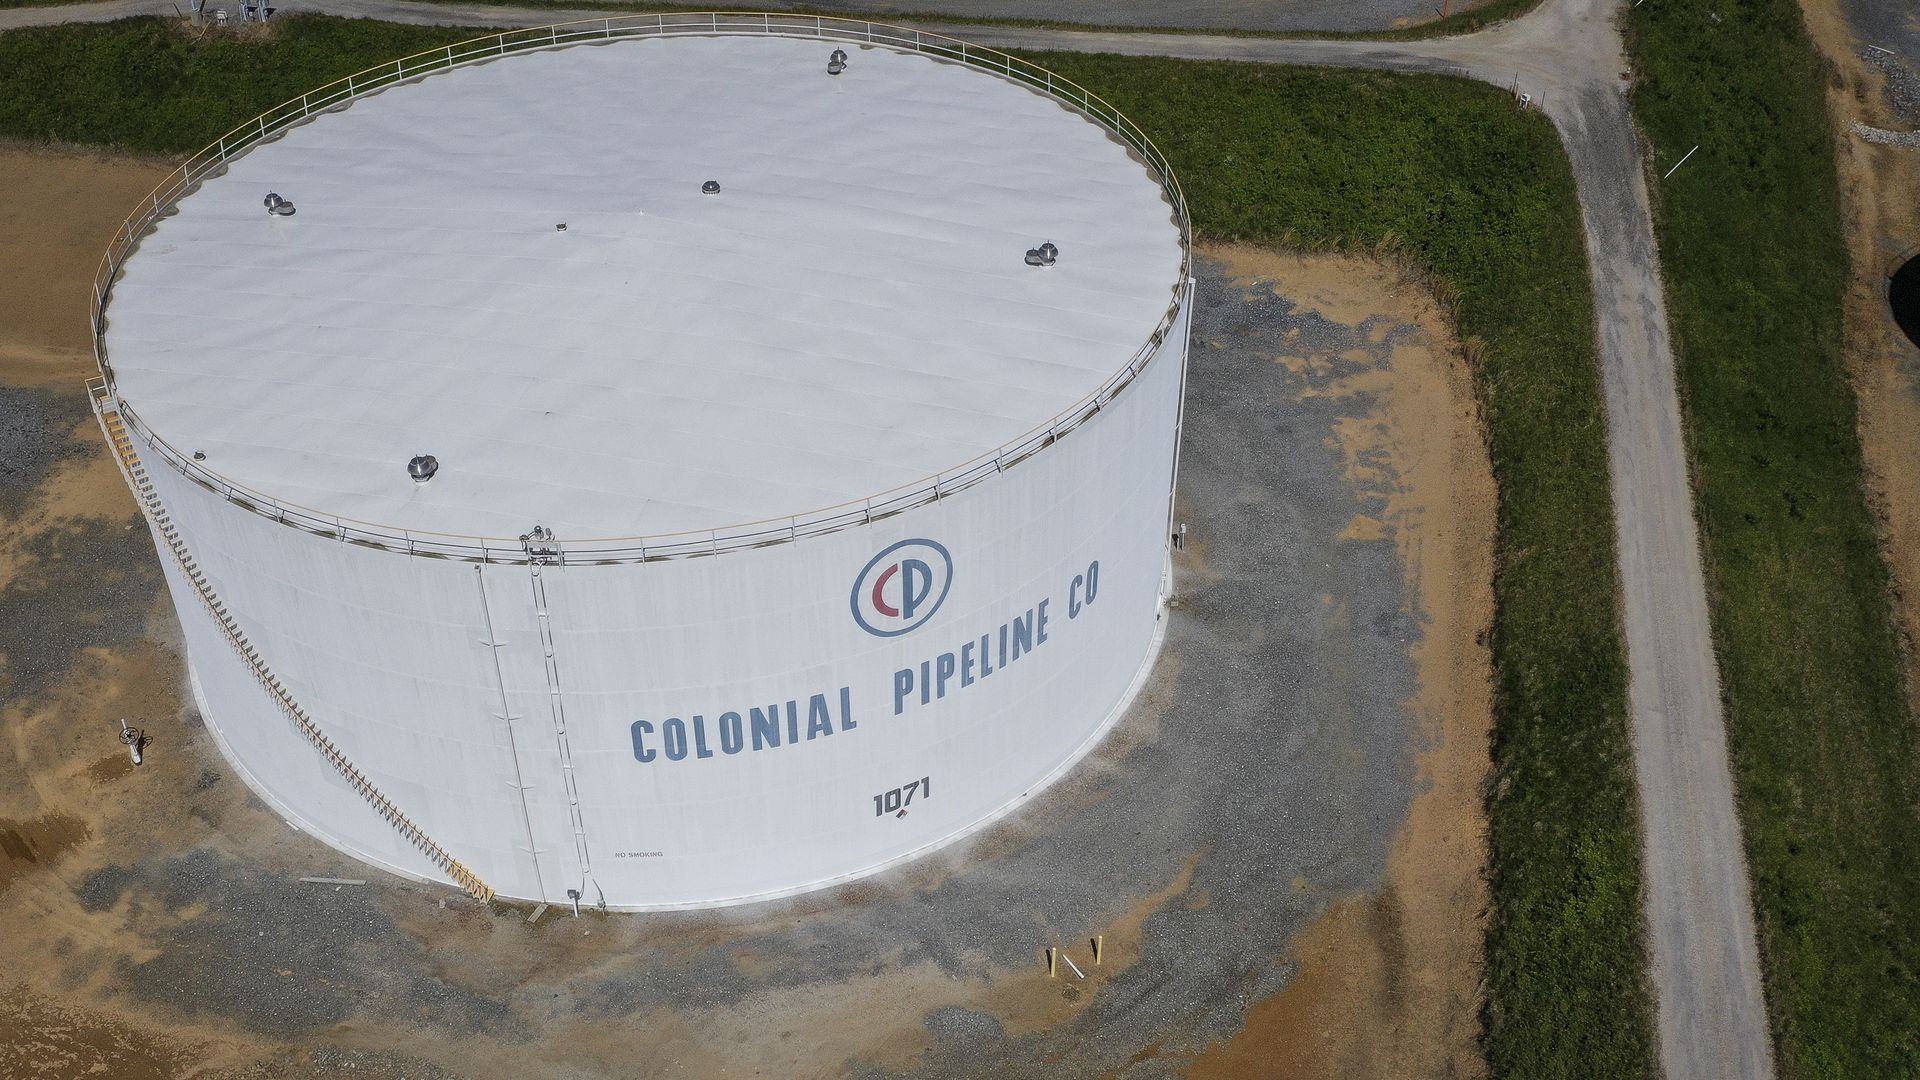 A fuel tank at Colonial Pipeline's Dorsey Junction Station on May 13, 2021 in Washington, D.C. Photo: Drew Angerer/Getty Images